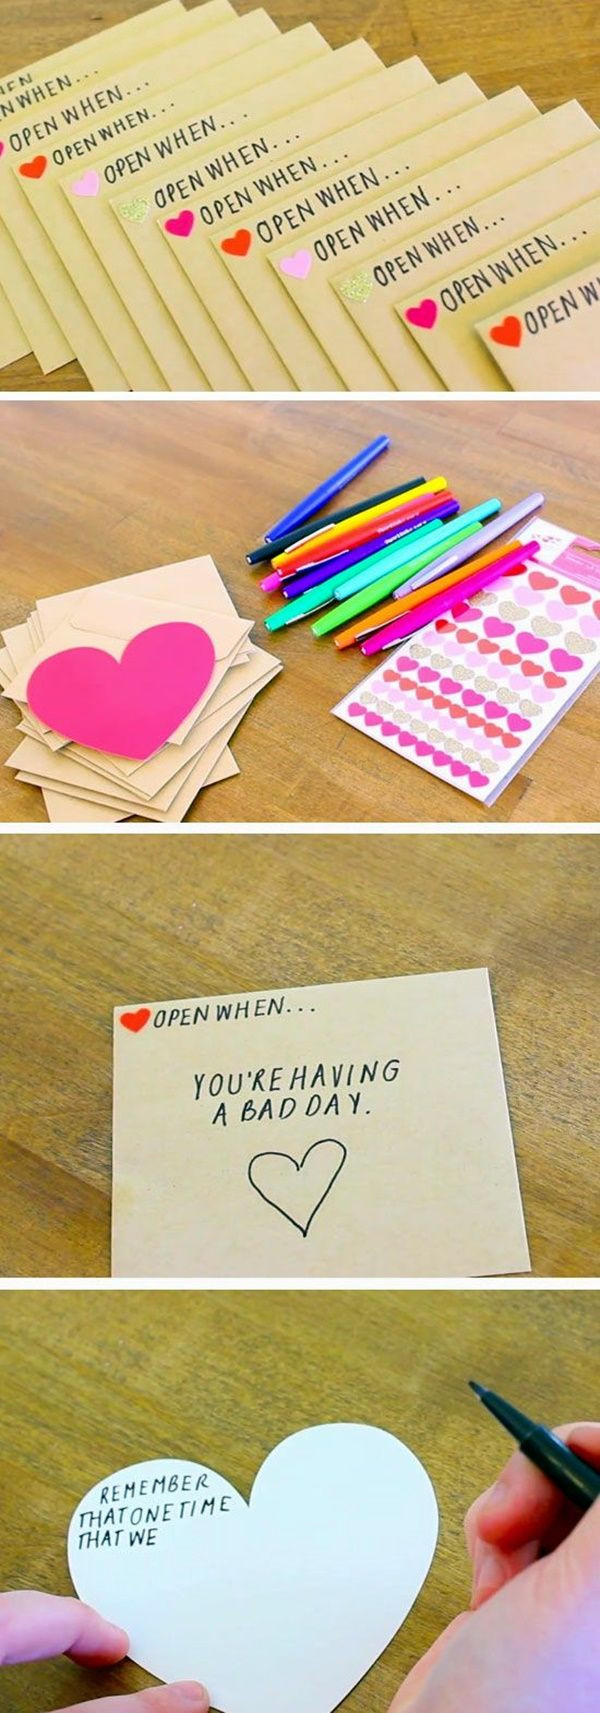 Birthday Gift Craft Ideas
 101 Homemade Valentines Day Ideas for Him that re really